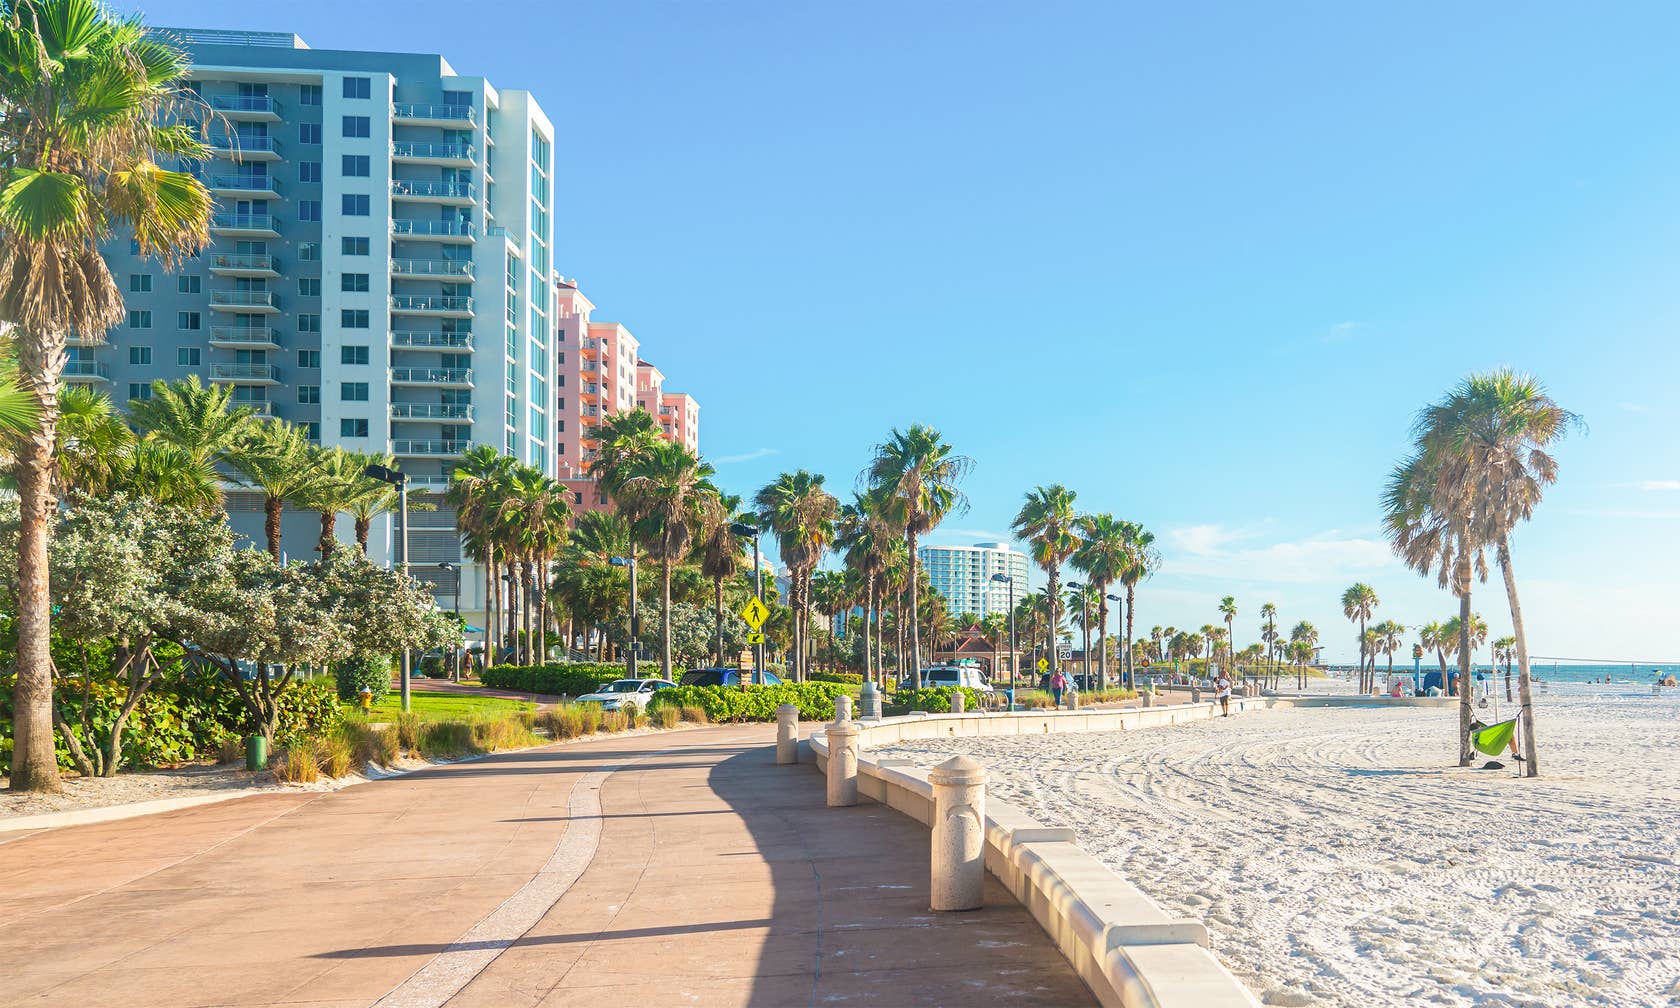 Vacation rentals in Clearwater